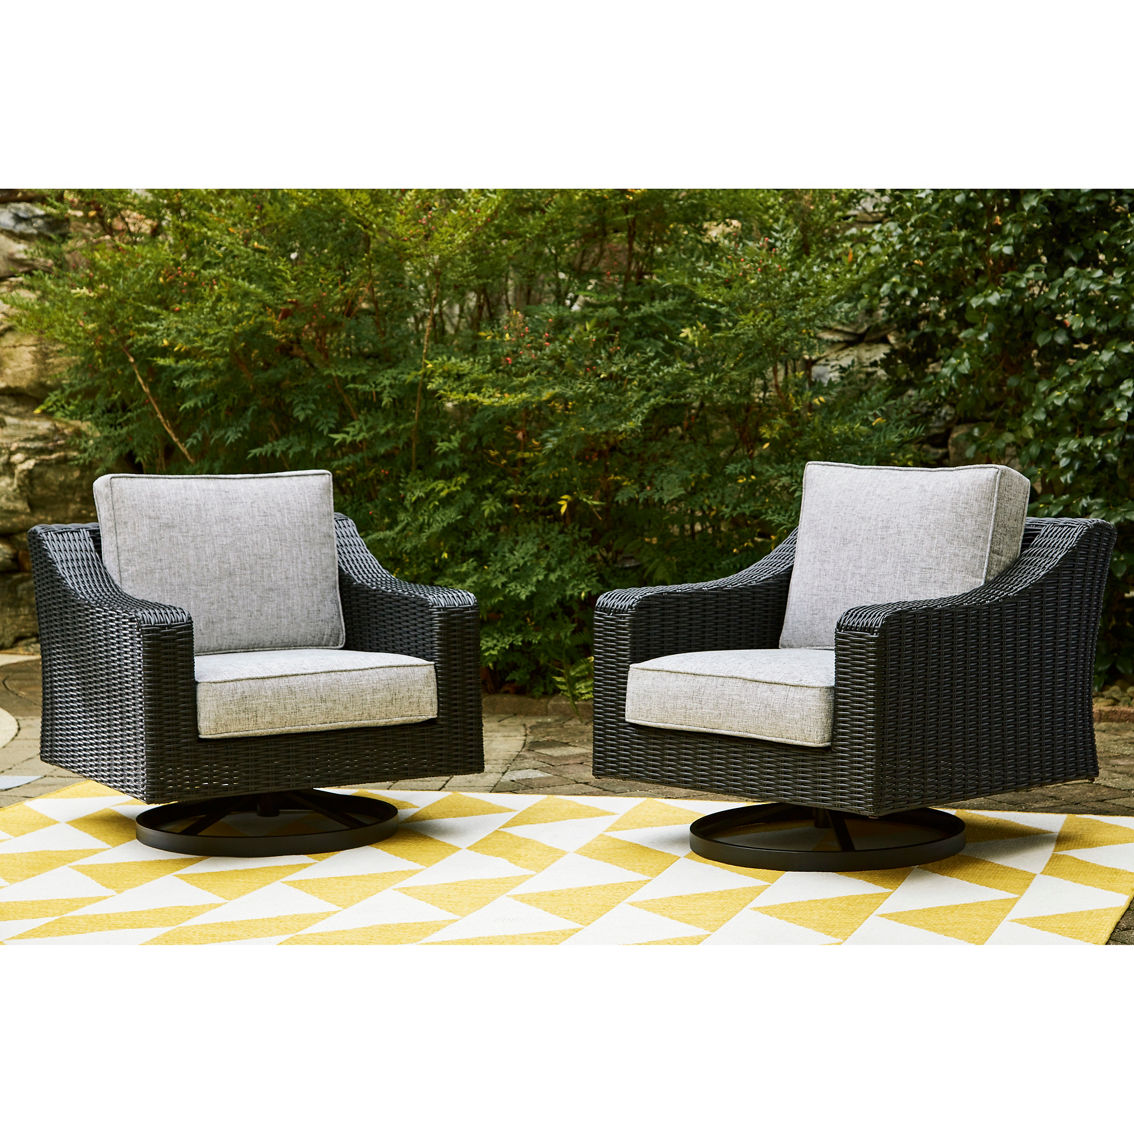 Signature Design by Ashley Beachcroft 5 pc. Outdoor Set including Firepit Table - Image 3 of 7